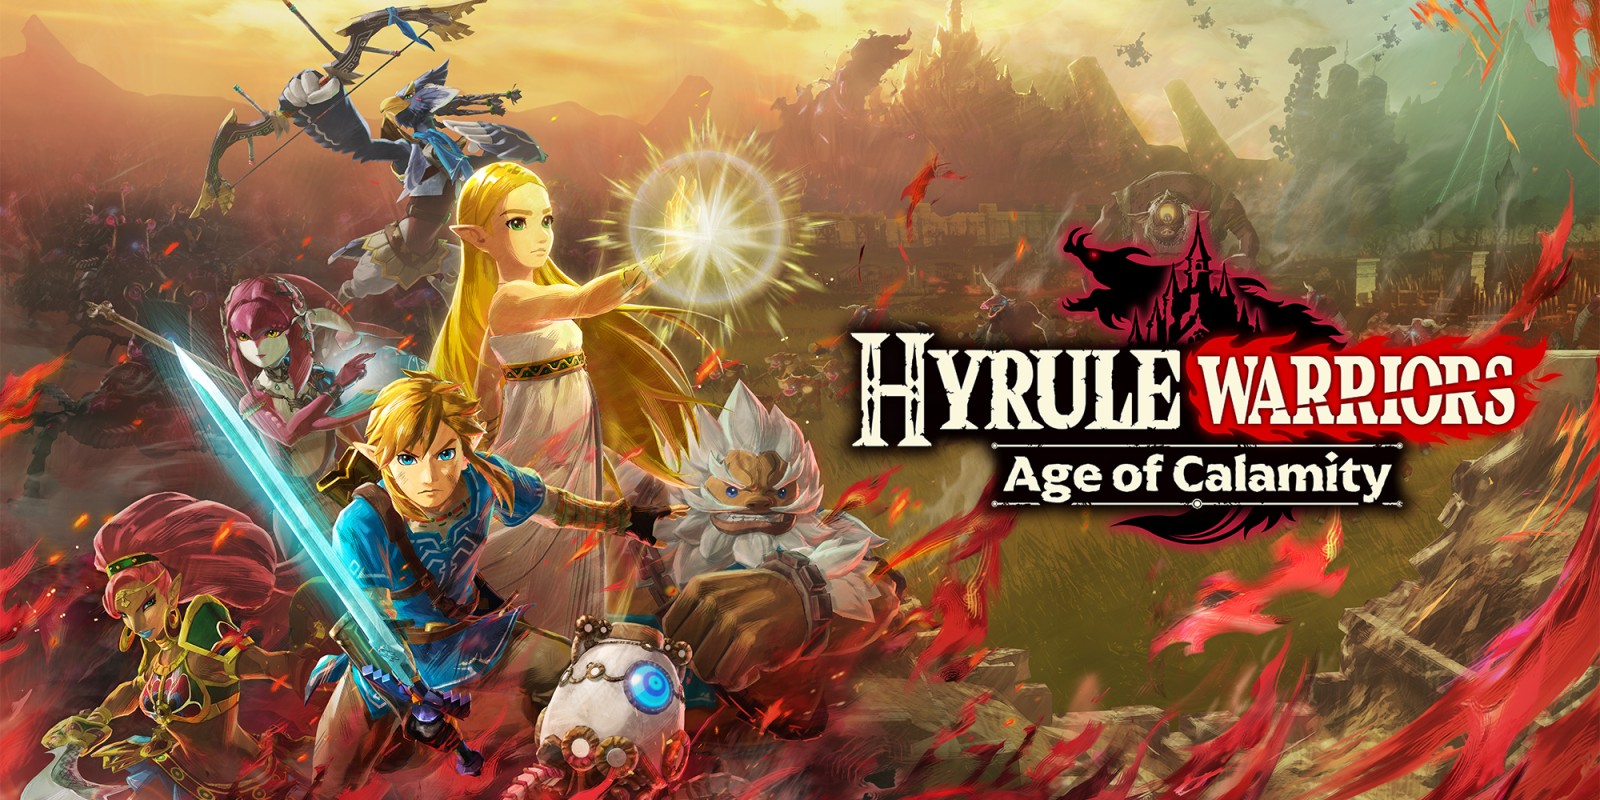 Hyrule Warriors: Age of Calamity | Nintendo Switch games | Games | Nintendo